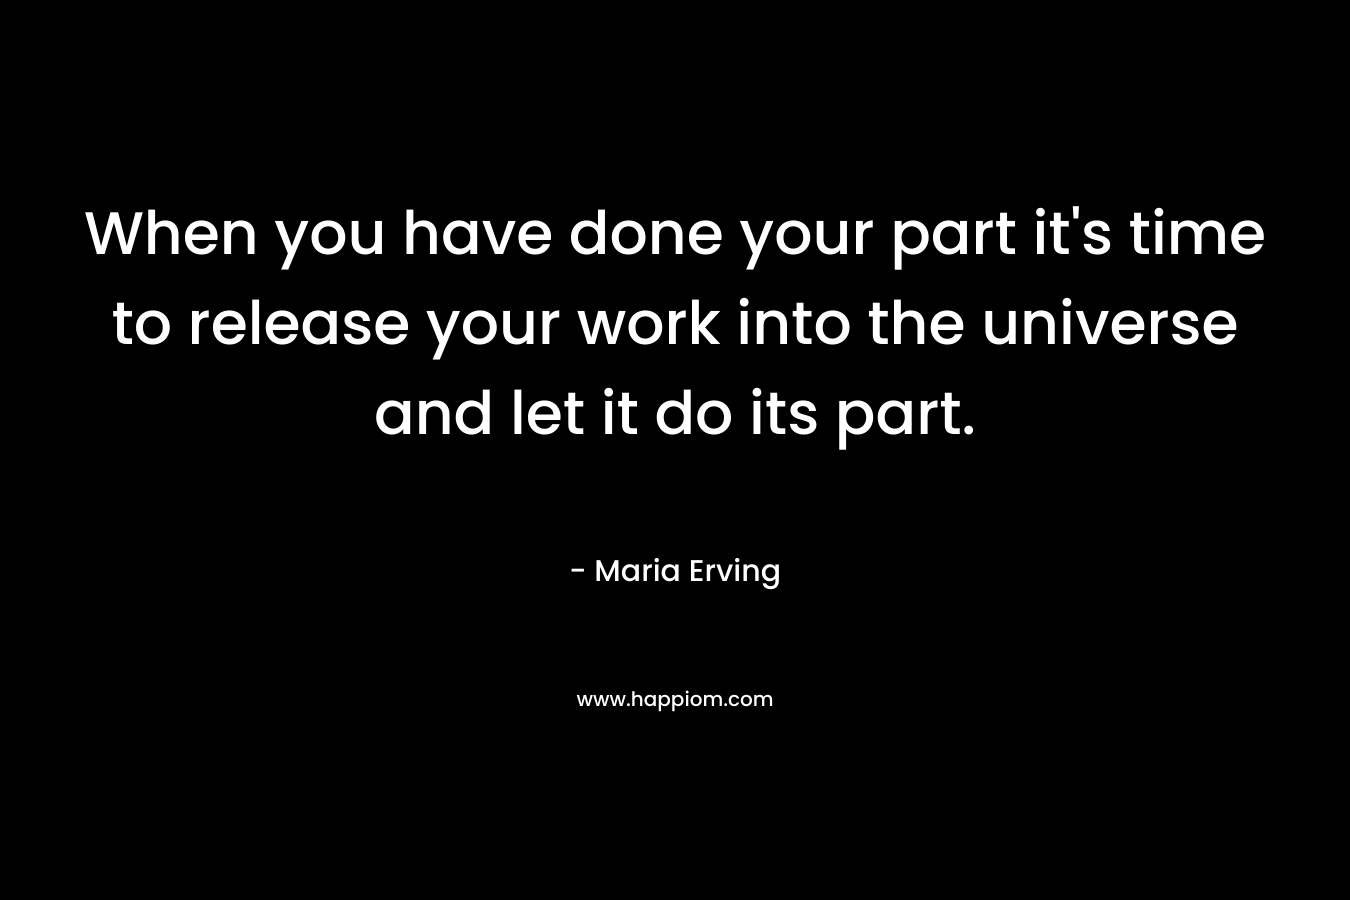 When you have done your part it's time to release your work into the universe and let it do its part.